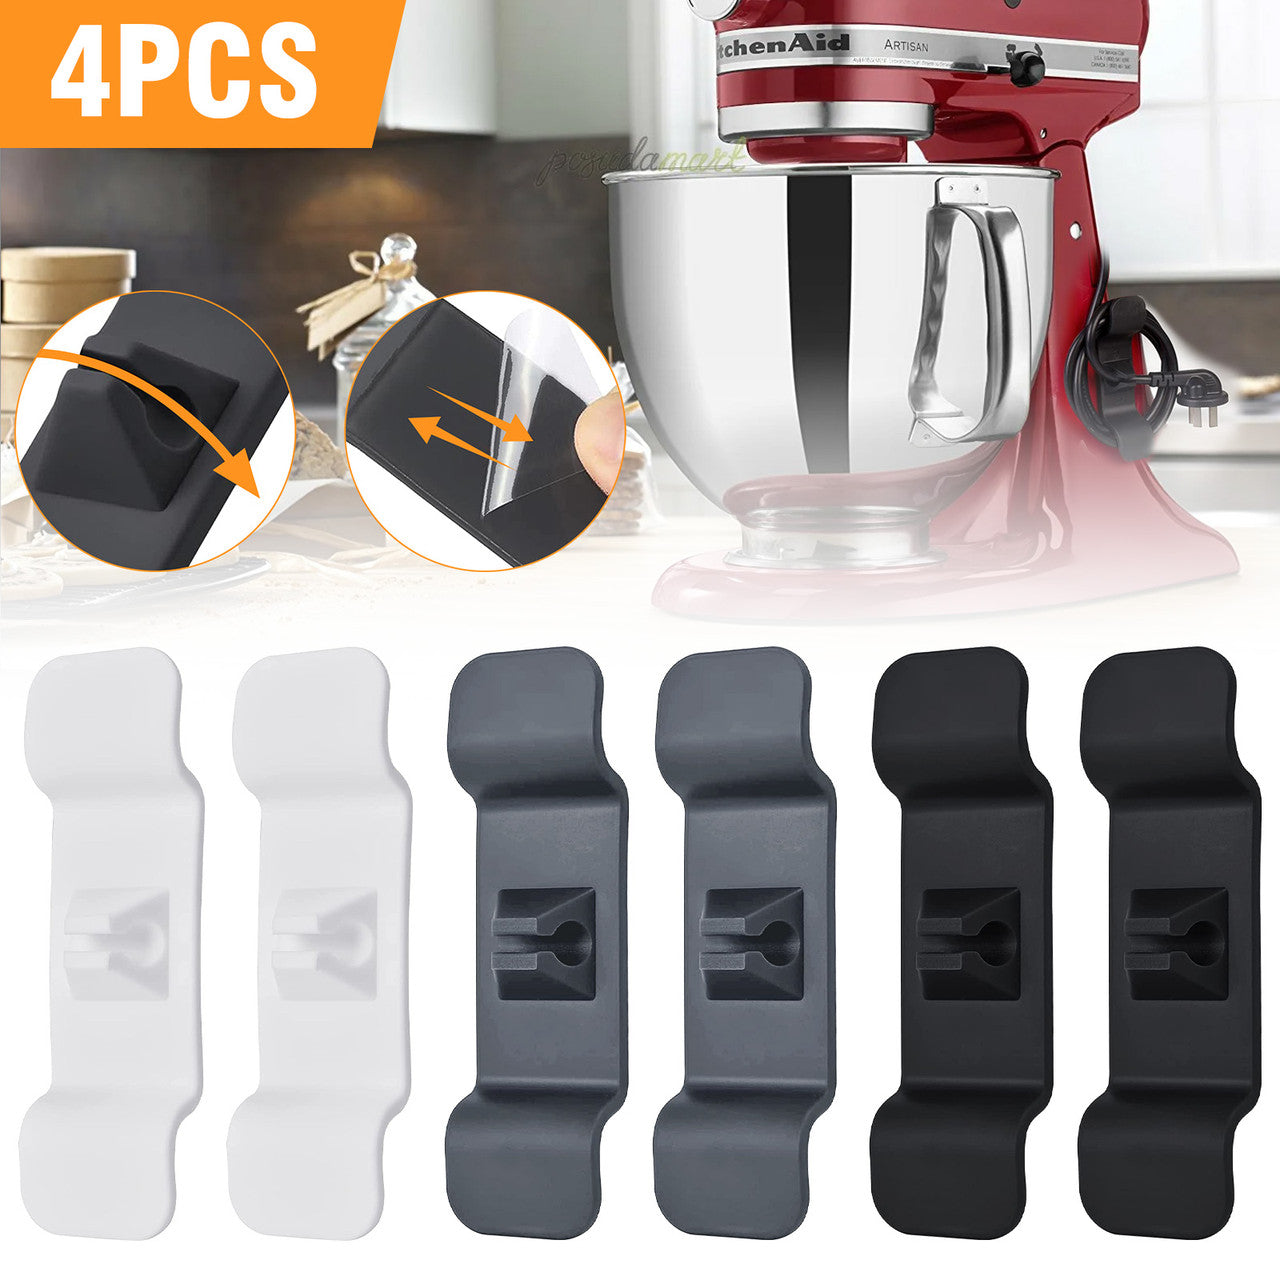 Sturdy Kitchen Winder Sticky Pads with a Wide Range of Uses, Easy to Install, White and Black, 4pcs